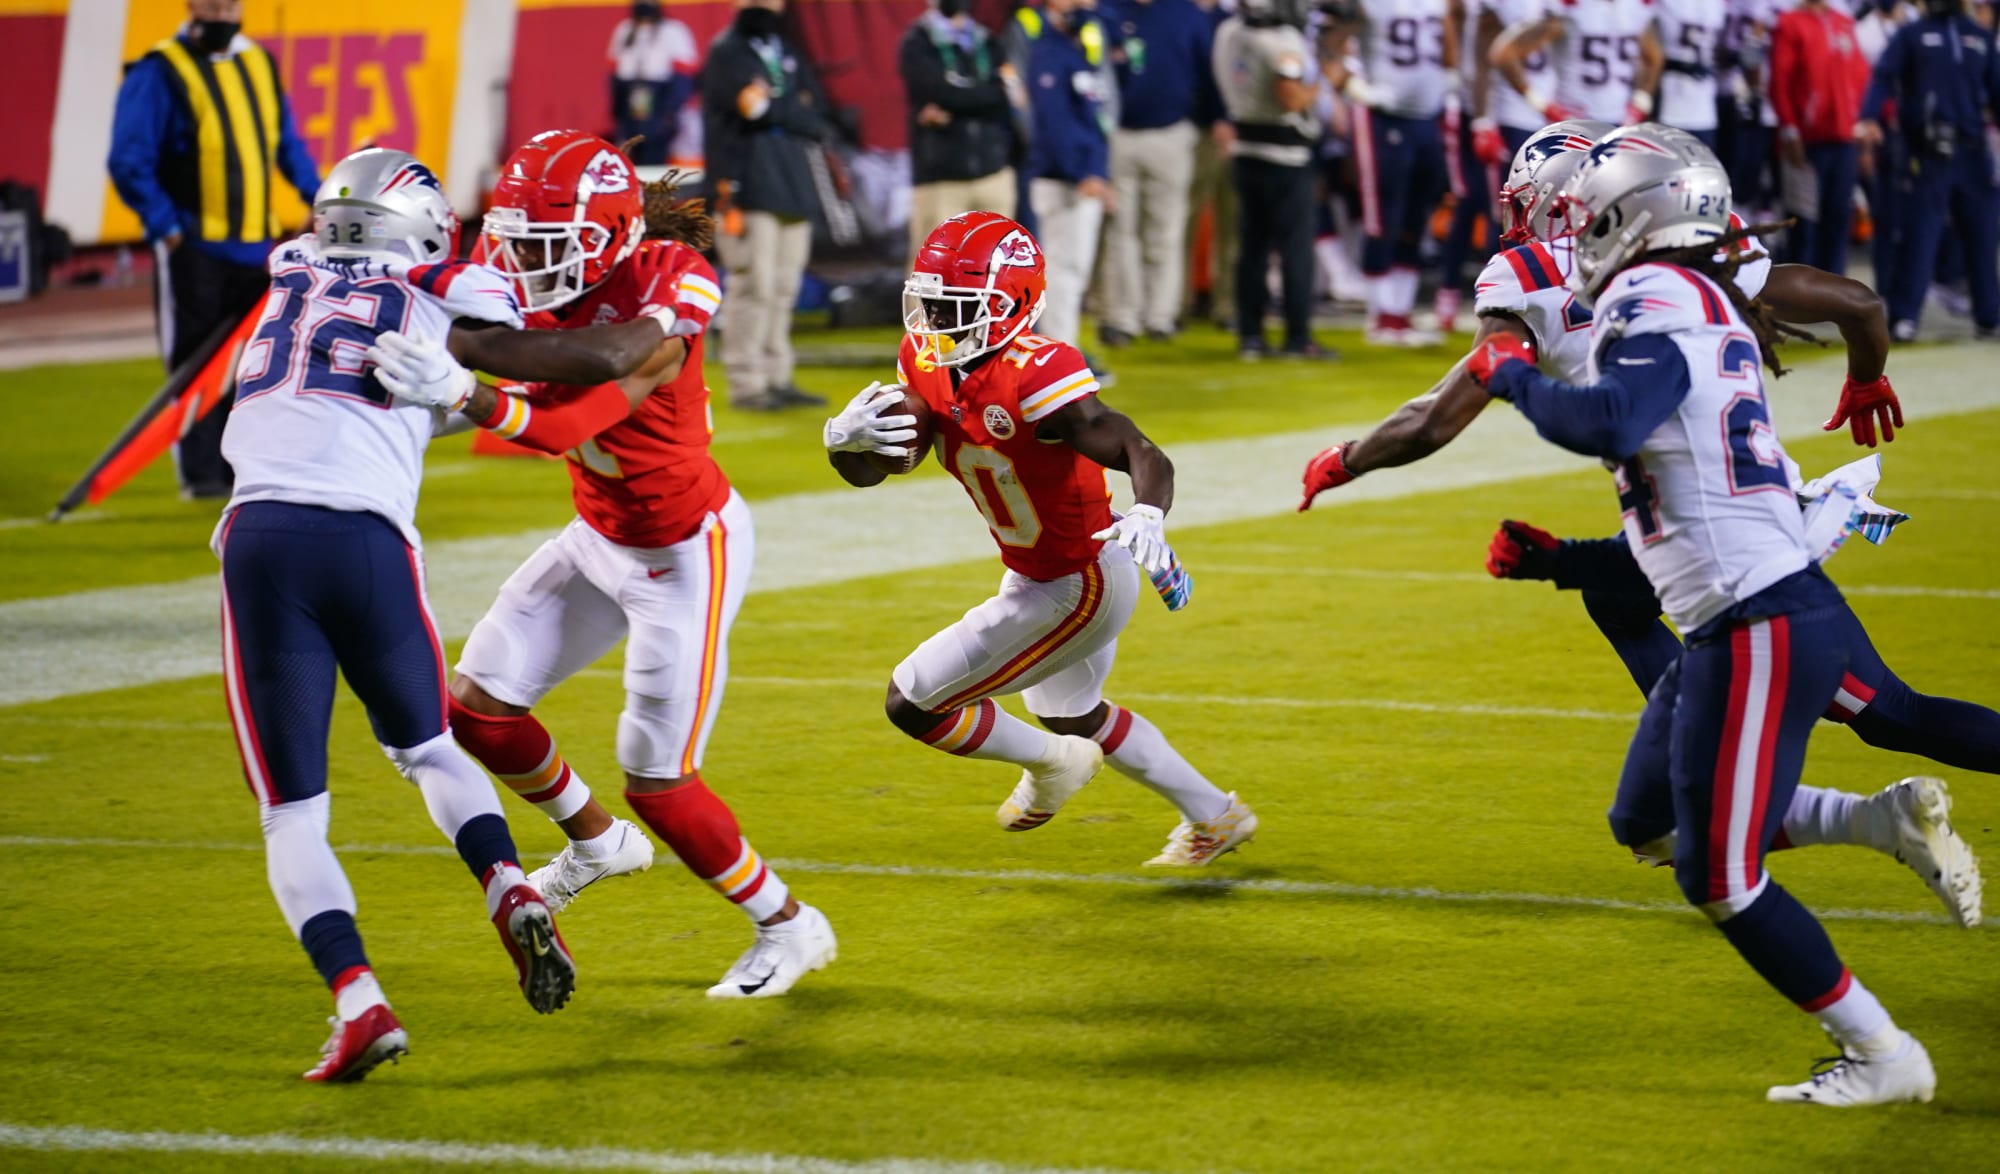 Kansas City Chiefs rely on defense to beat the New England Patriots